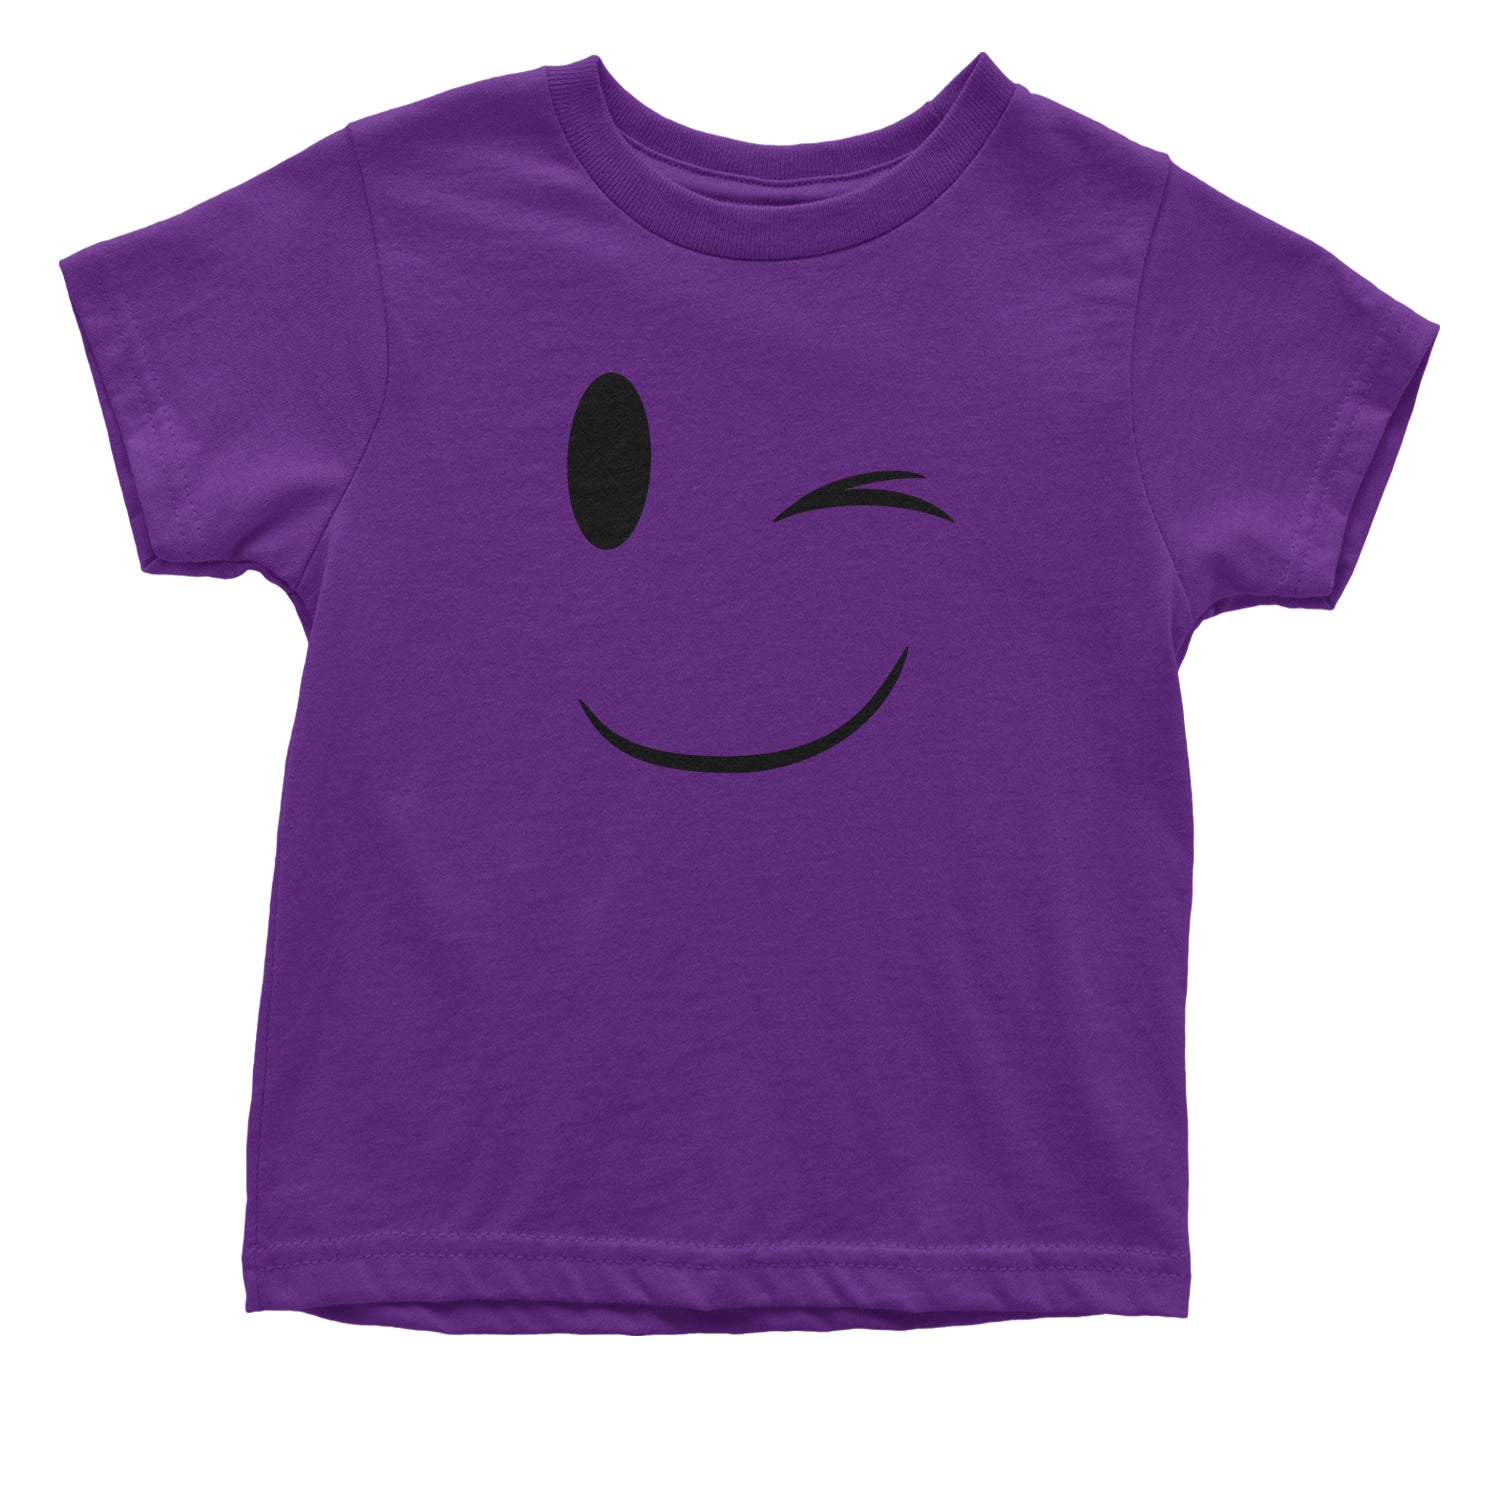 Emoticon Winking Smile Face Toddler T-Shirt cosplay, costume, dress, emoji, emote, face, halloween, smiley, up, yellow by Expression Tees